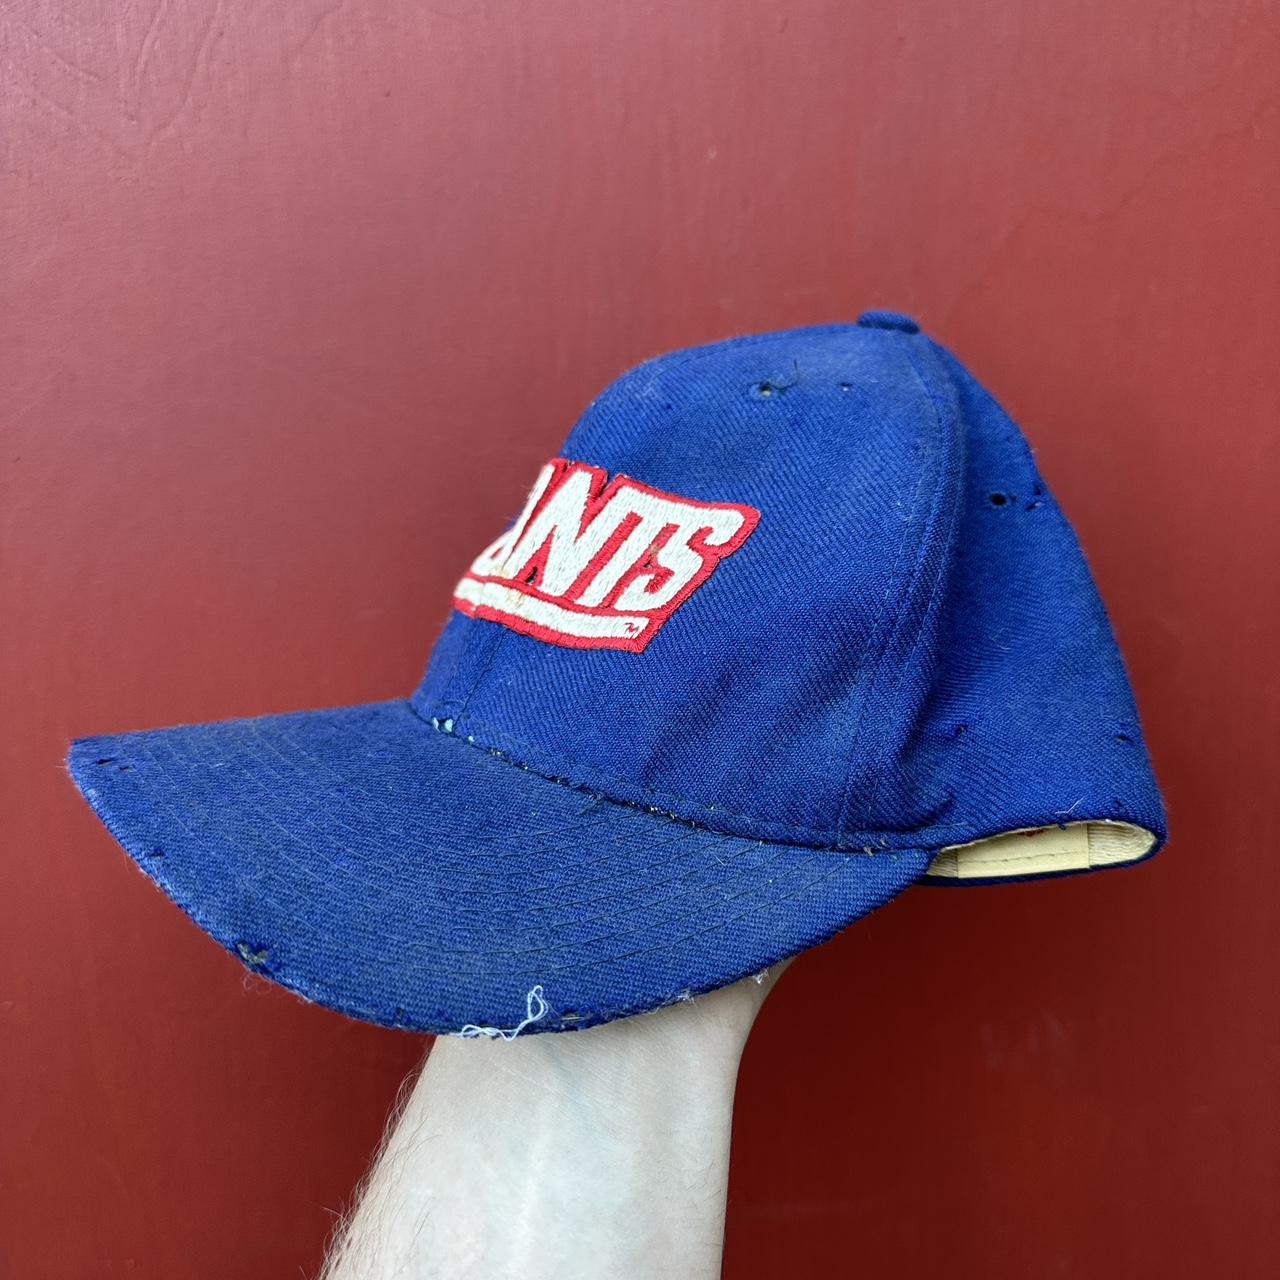 New with tags! Vintage Retro 2000s era Cooperstown - Depop